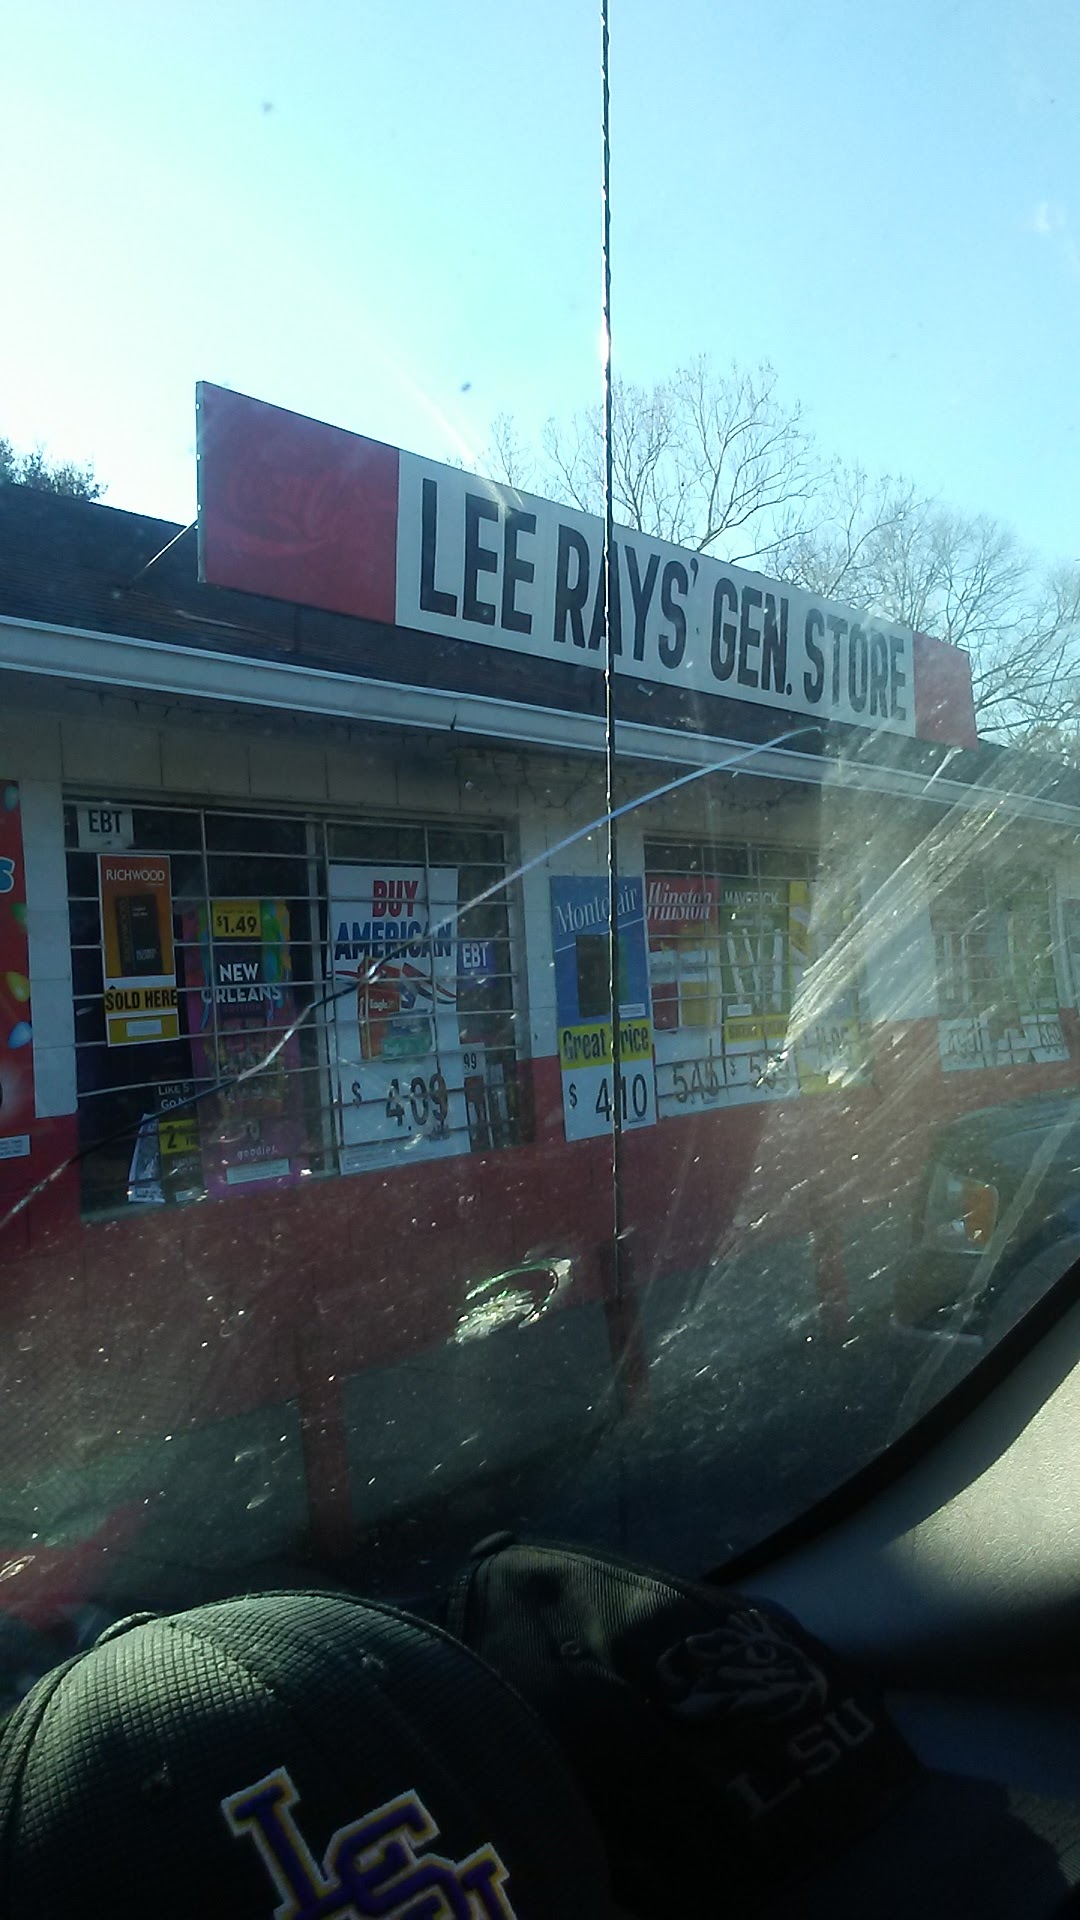 Lee Ray's General Store